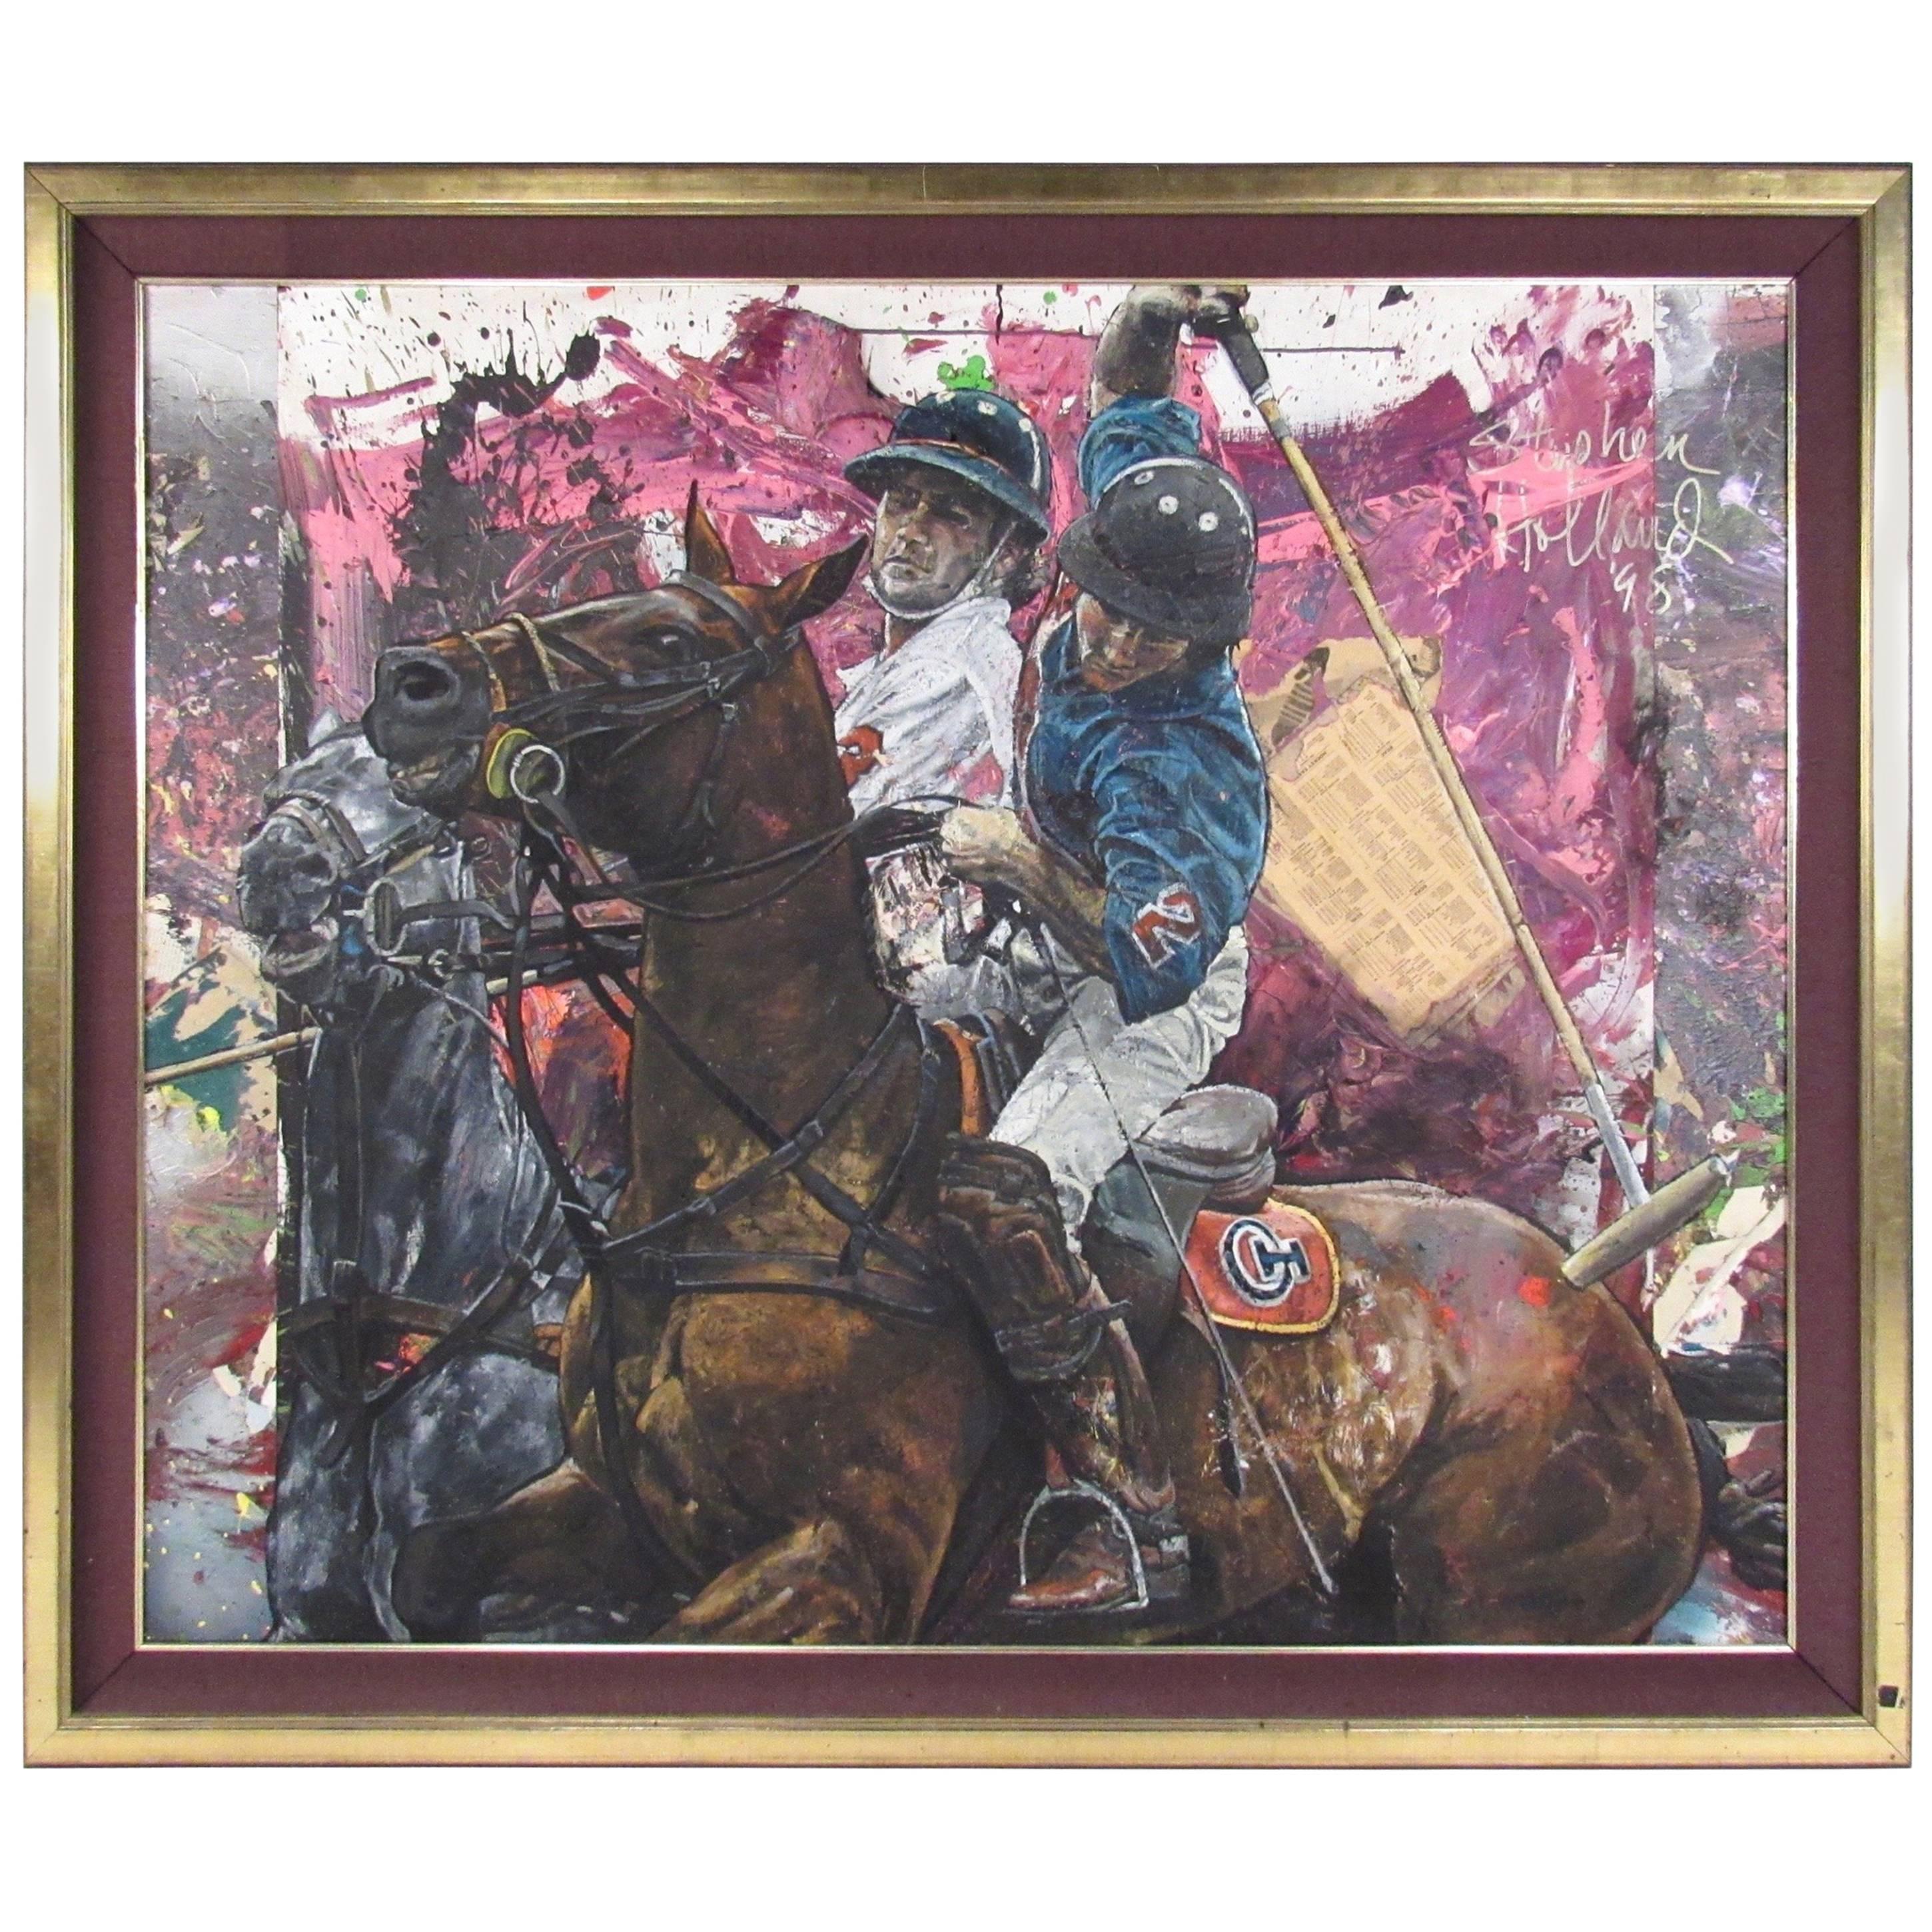 Stephen Holland "Polo Brothers" Oil on Canvas Painting